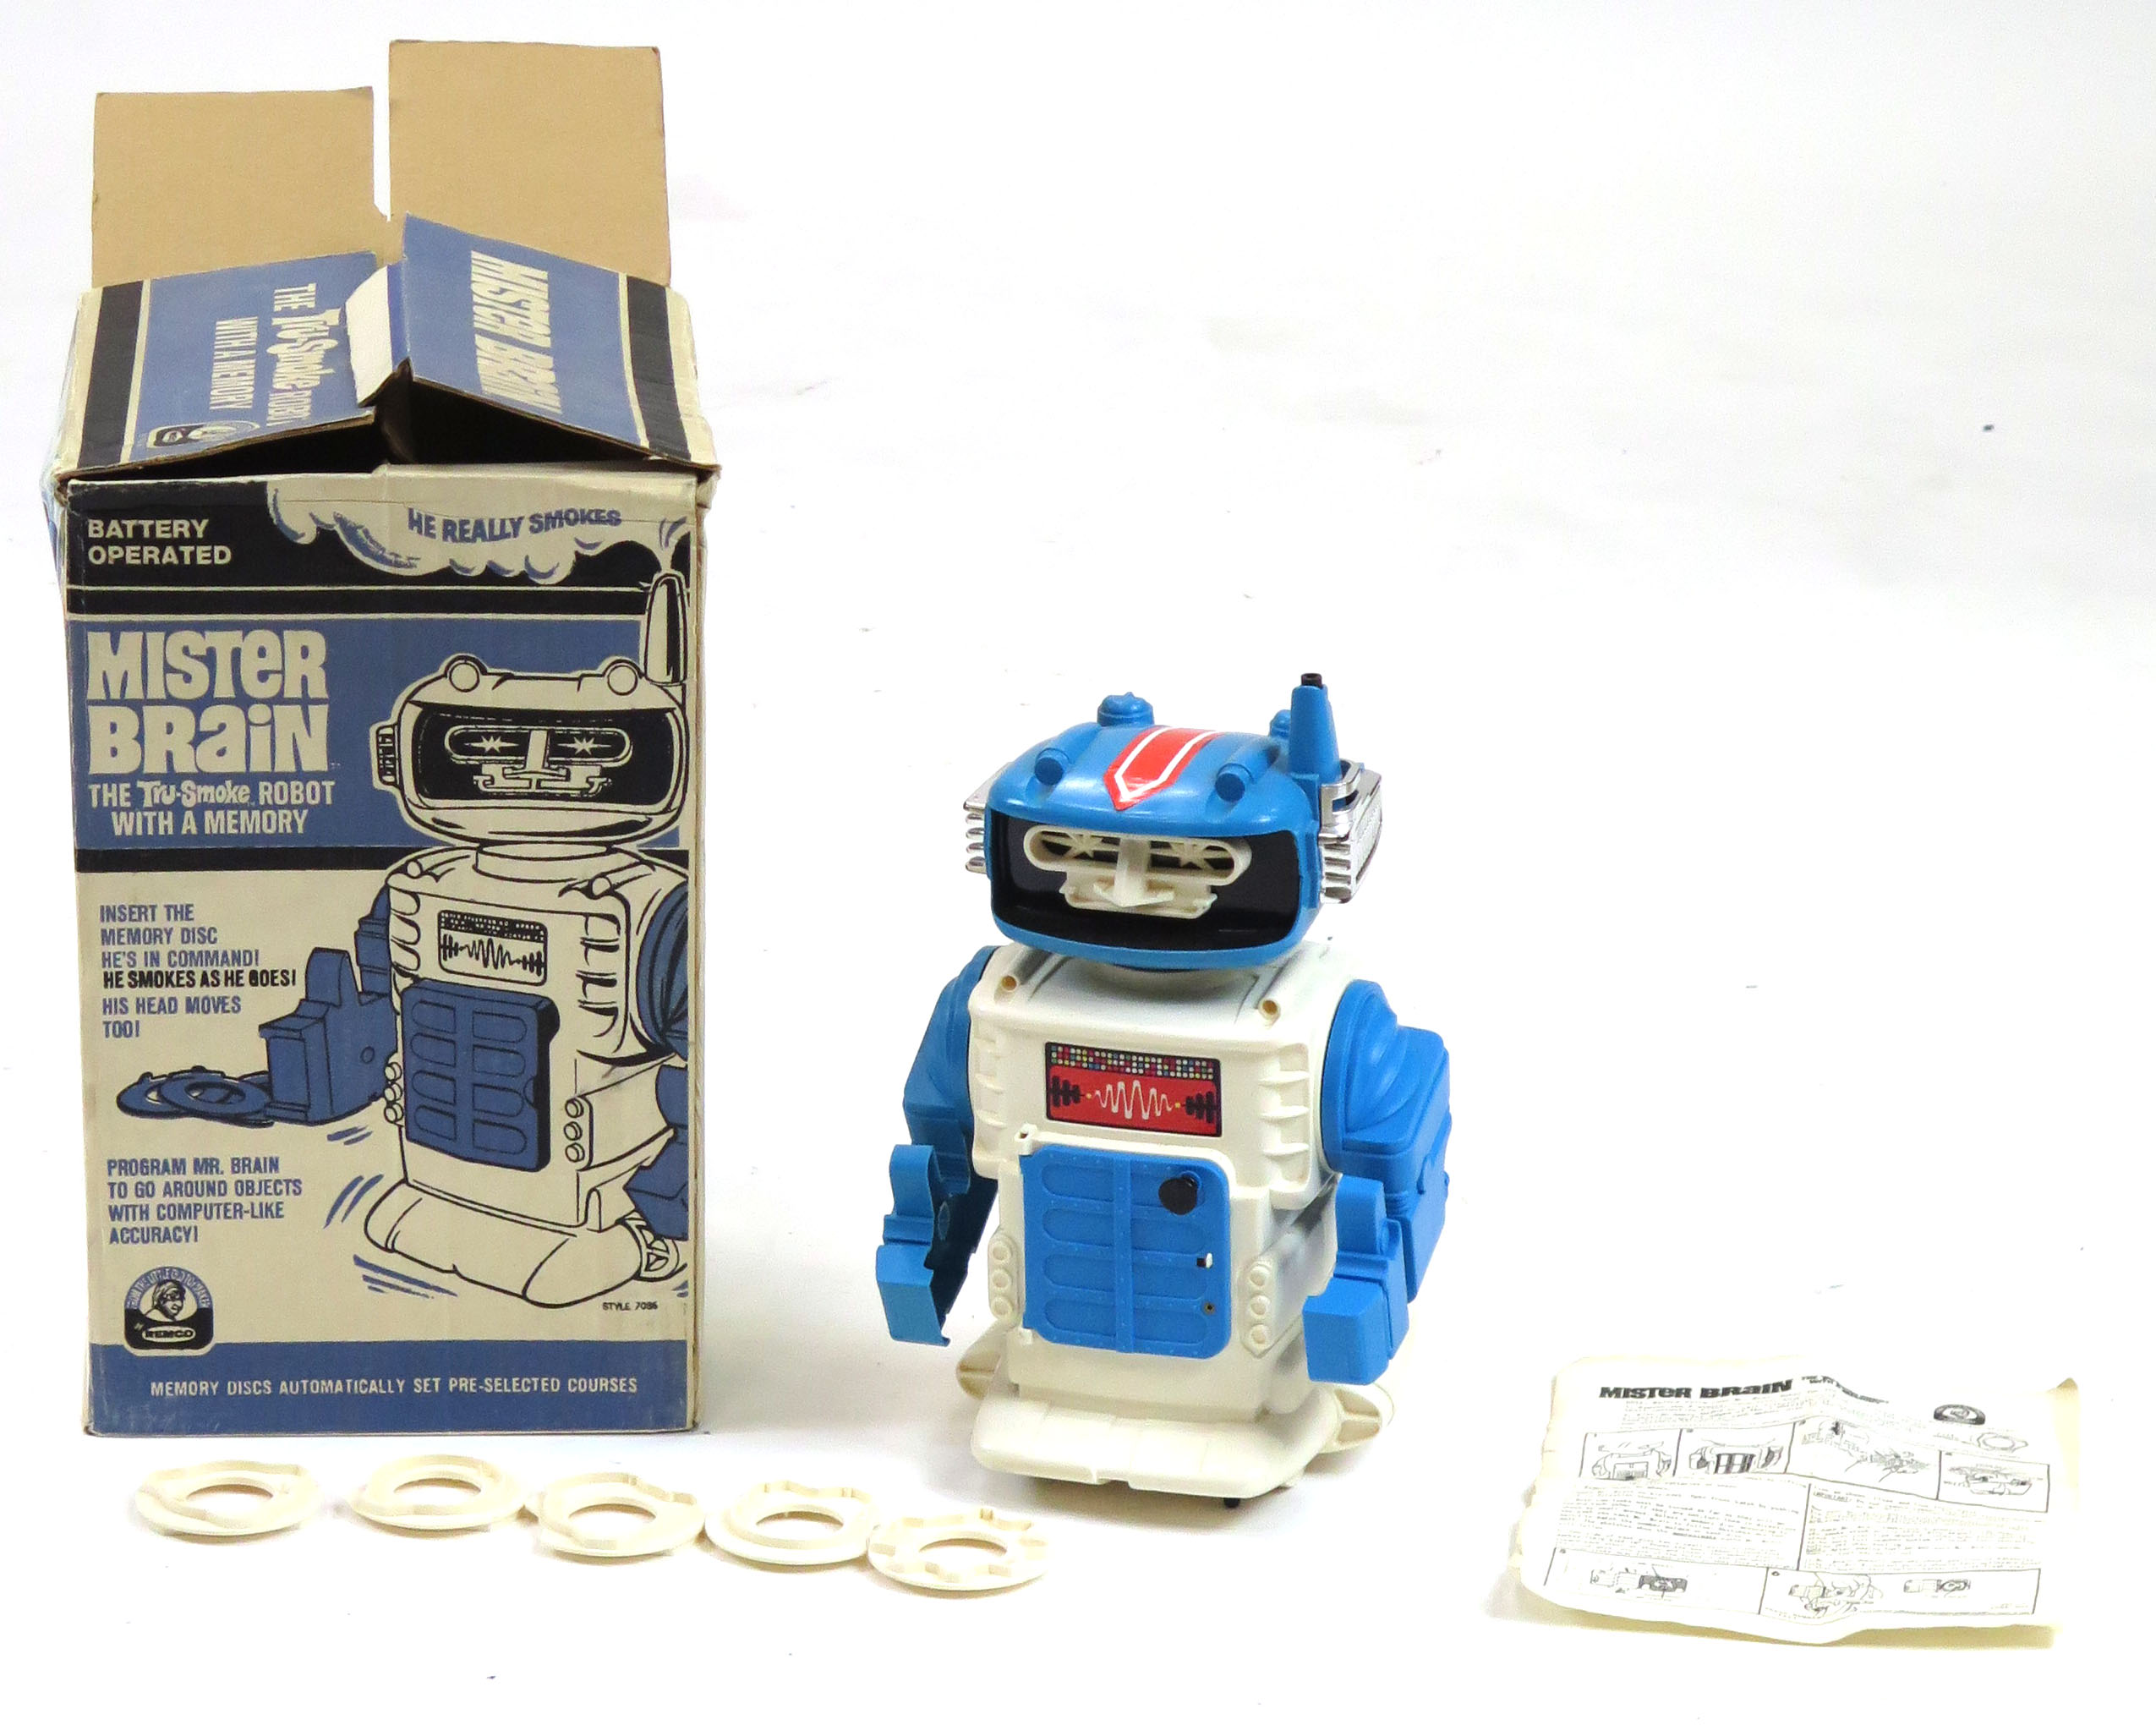 1969 Remco Mister Brain Battery-Operated Robot in the Box – The